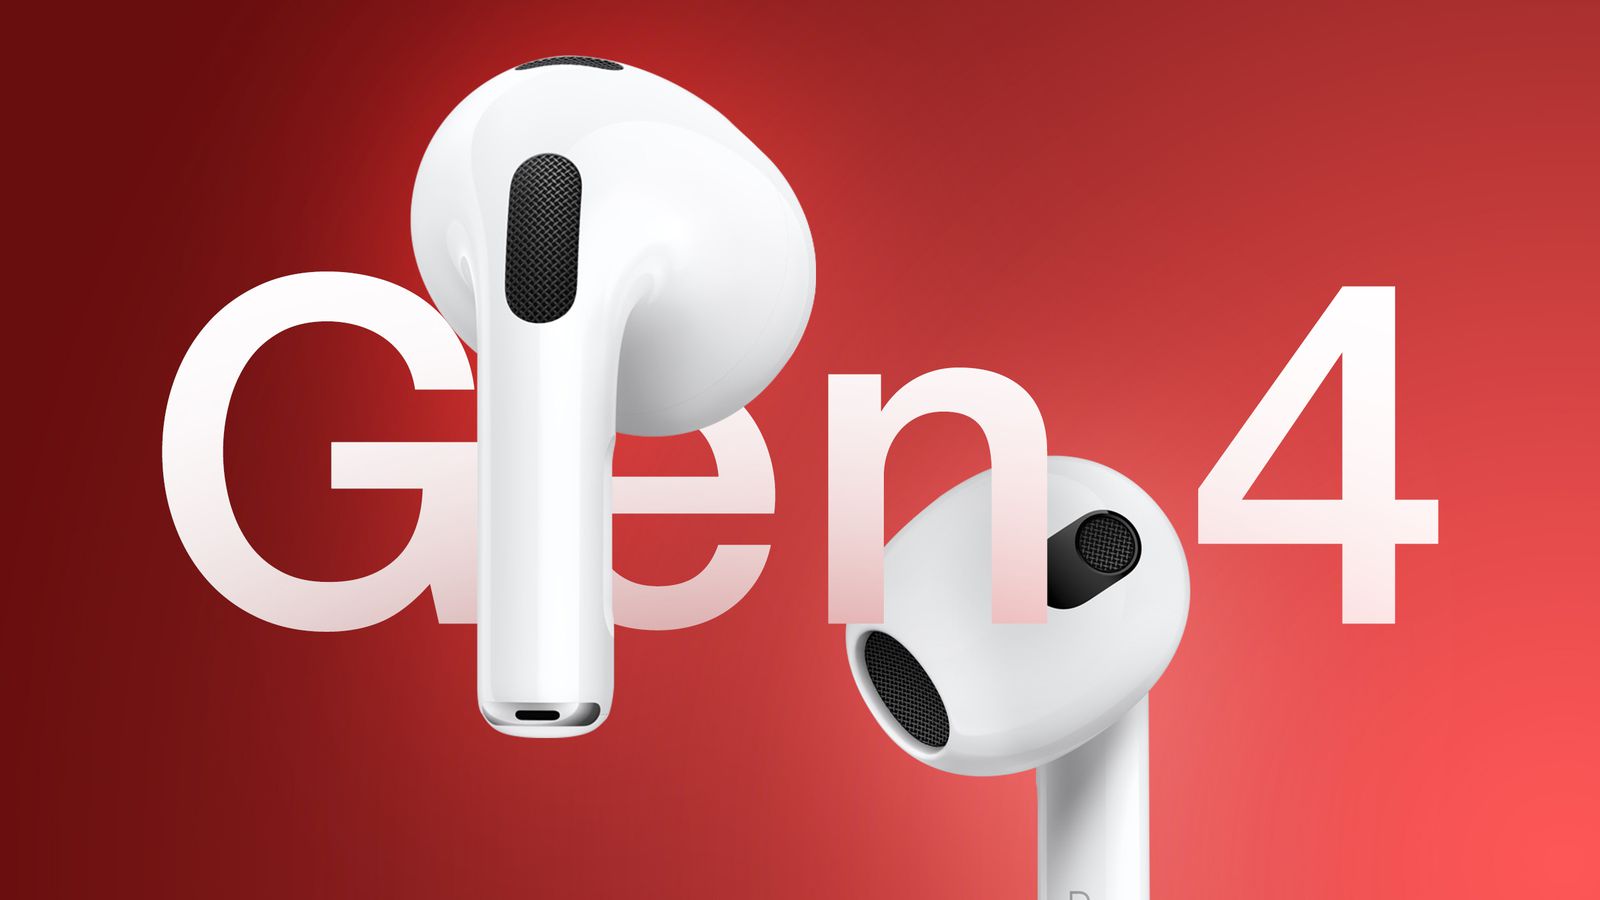 From iPhoneIslam.com, two wireless earbuds labeled “AirPods 4” float on a red background, showcasing their design and the placement of the microphone and speaker components.